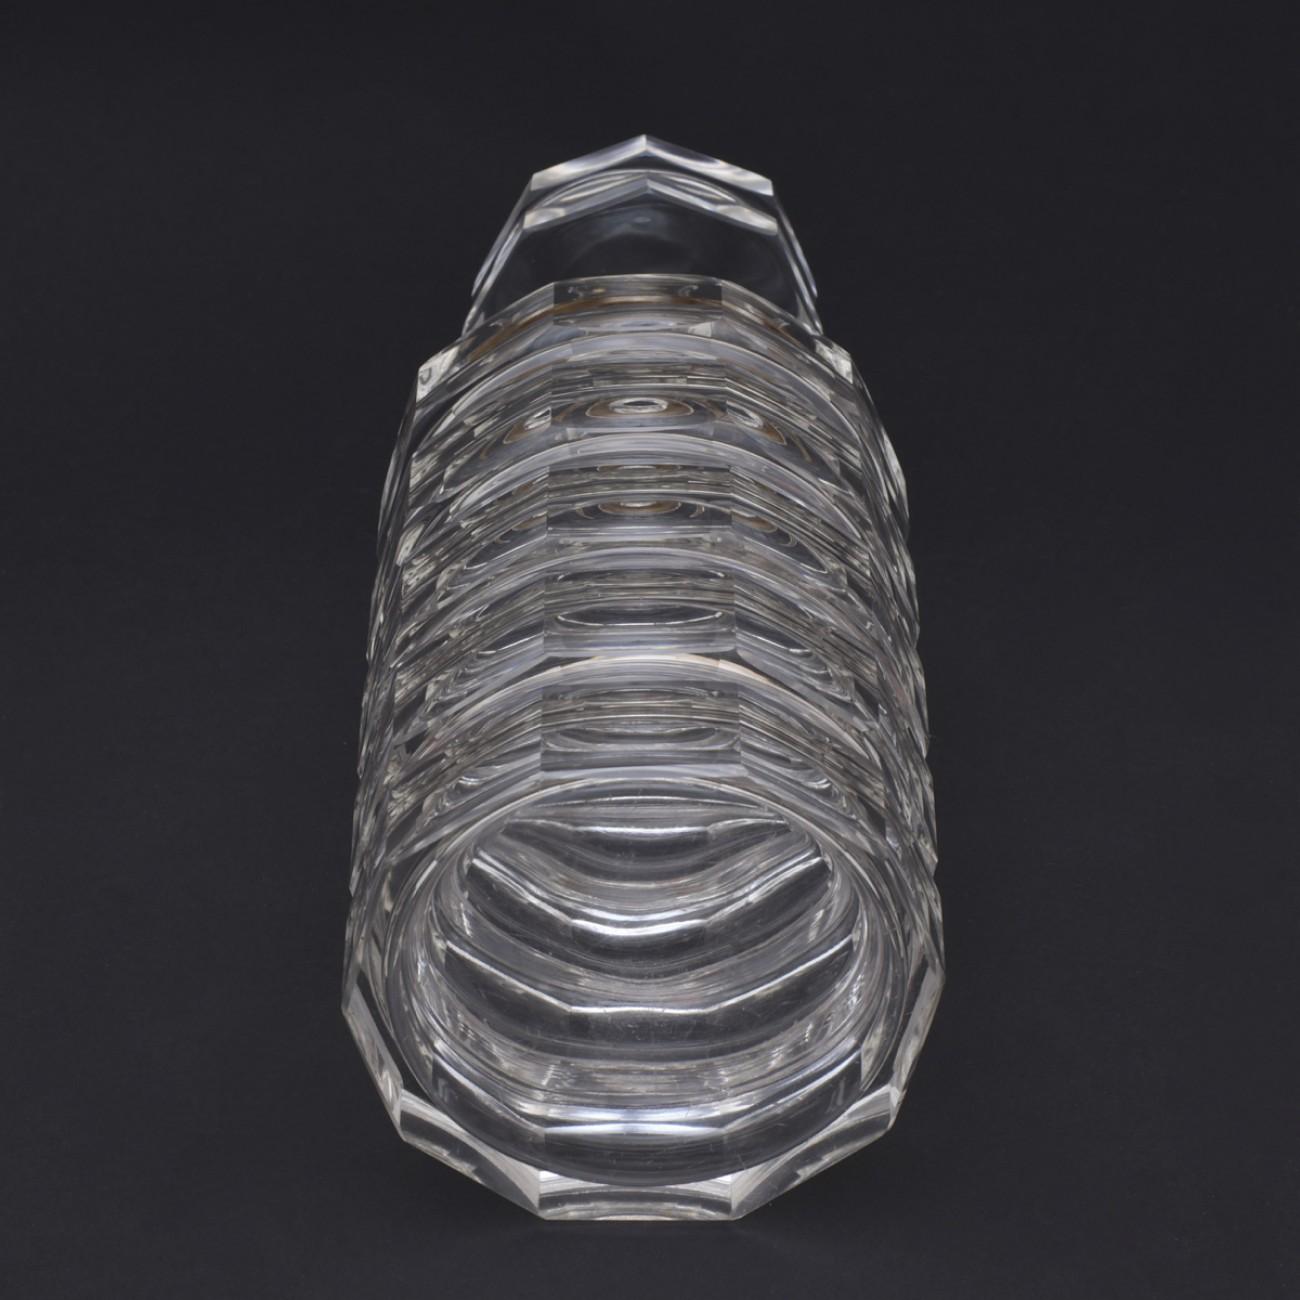 Stylish ten sided cut glass decanter with Sterling silver collar marked 900 and with makers mark for Simonet brothers of Belgium, circa 1935.
Well respected in their own right, the Simonet brothers produced work similar to Sabino and Lalique.